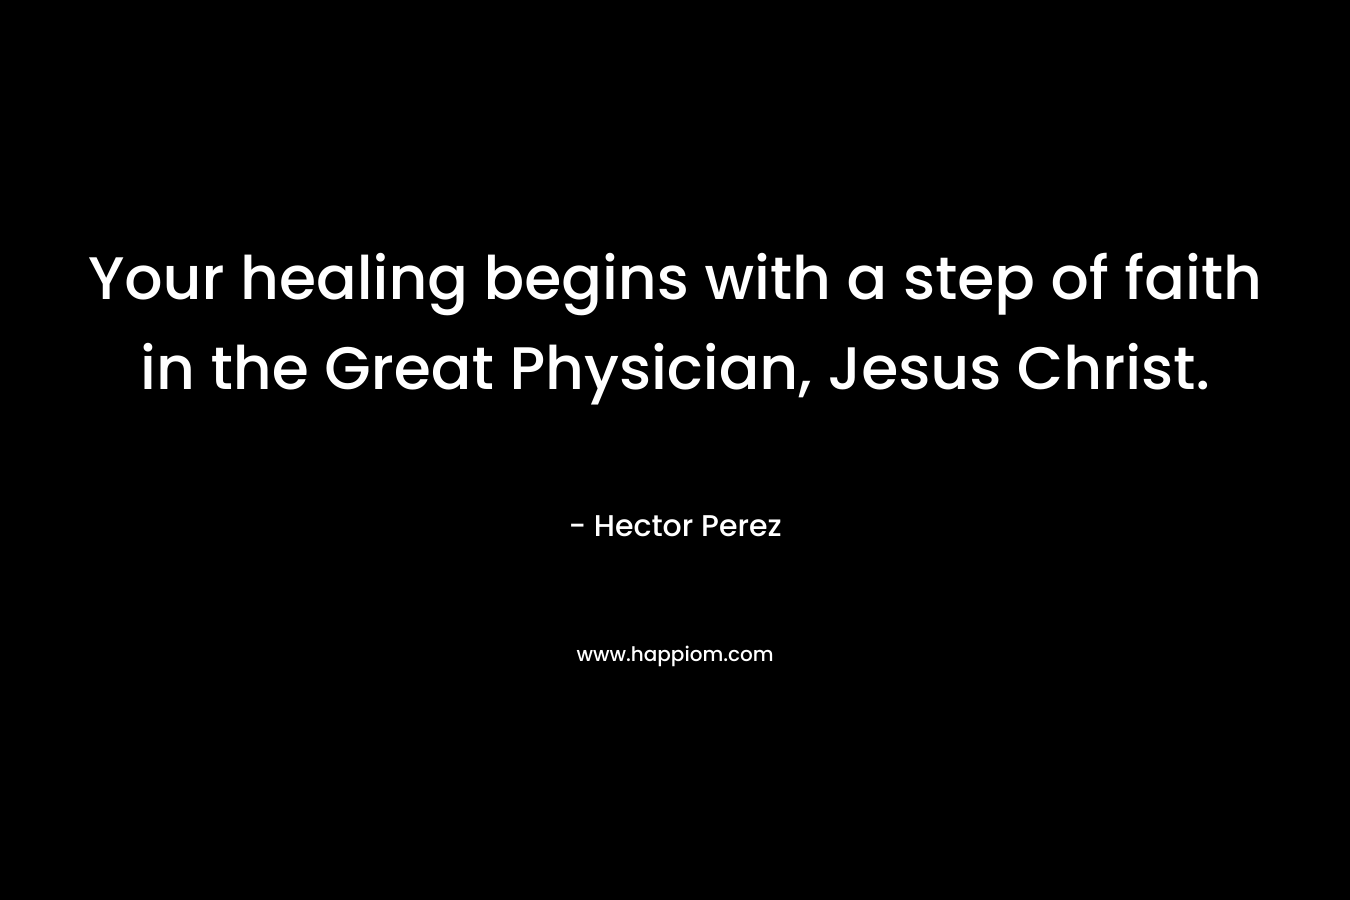 Your healing begins with a step of faith in the Great Physician, Jesus Christ. – Hector Perez